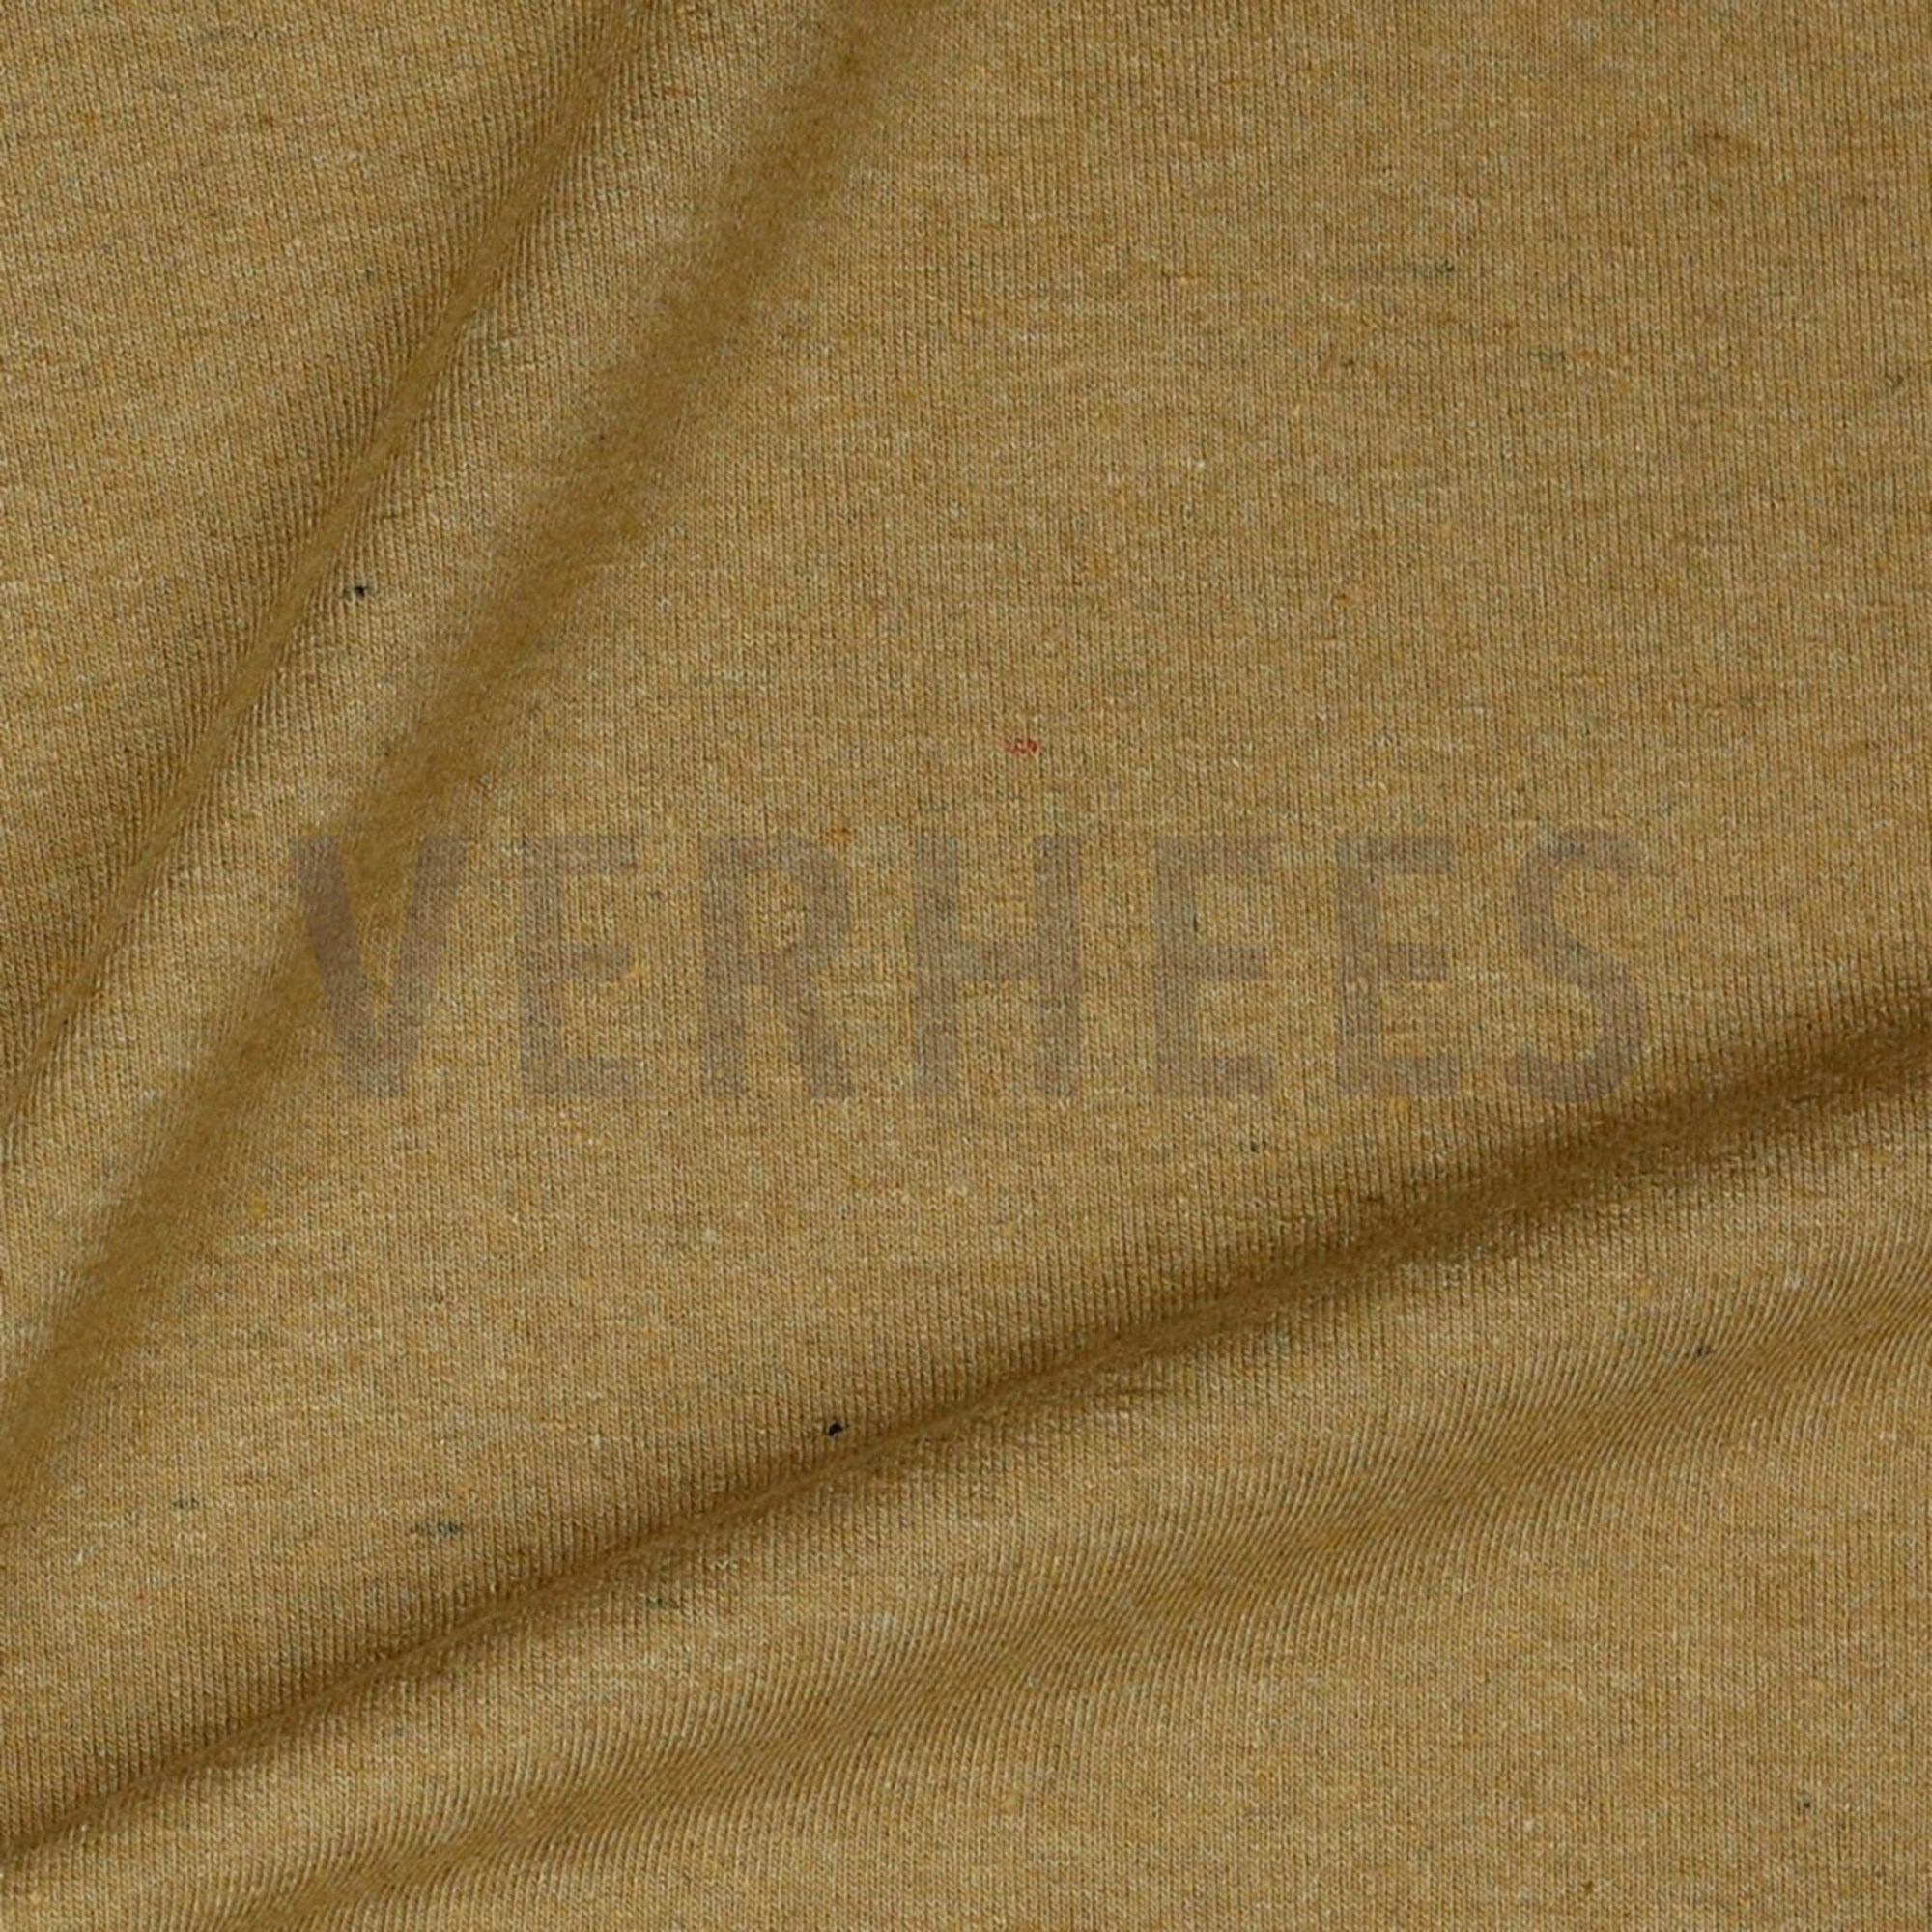 JERSEY RECYCLED LIGHT BROWN (high resolution) #3